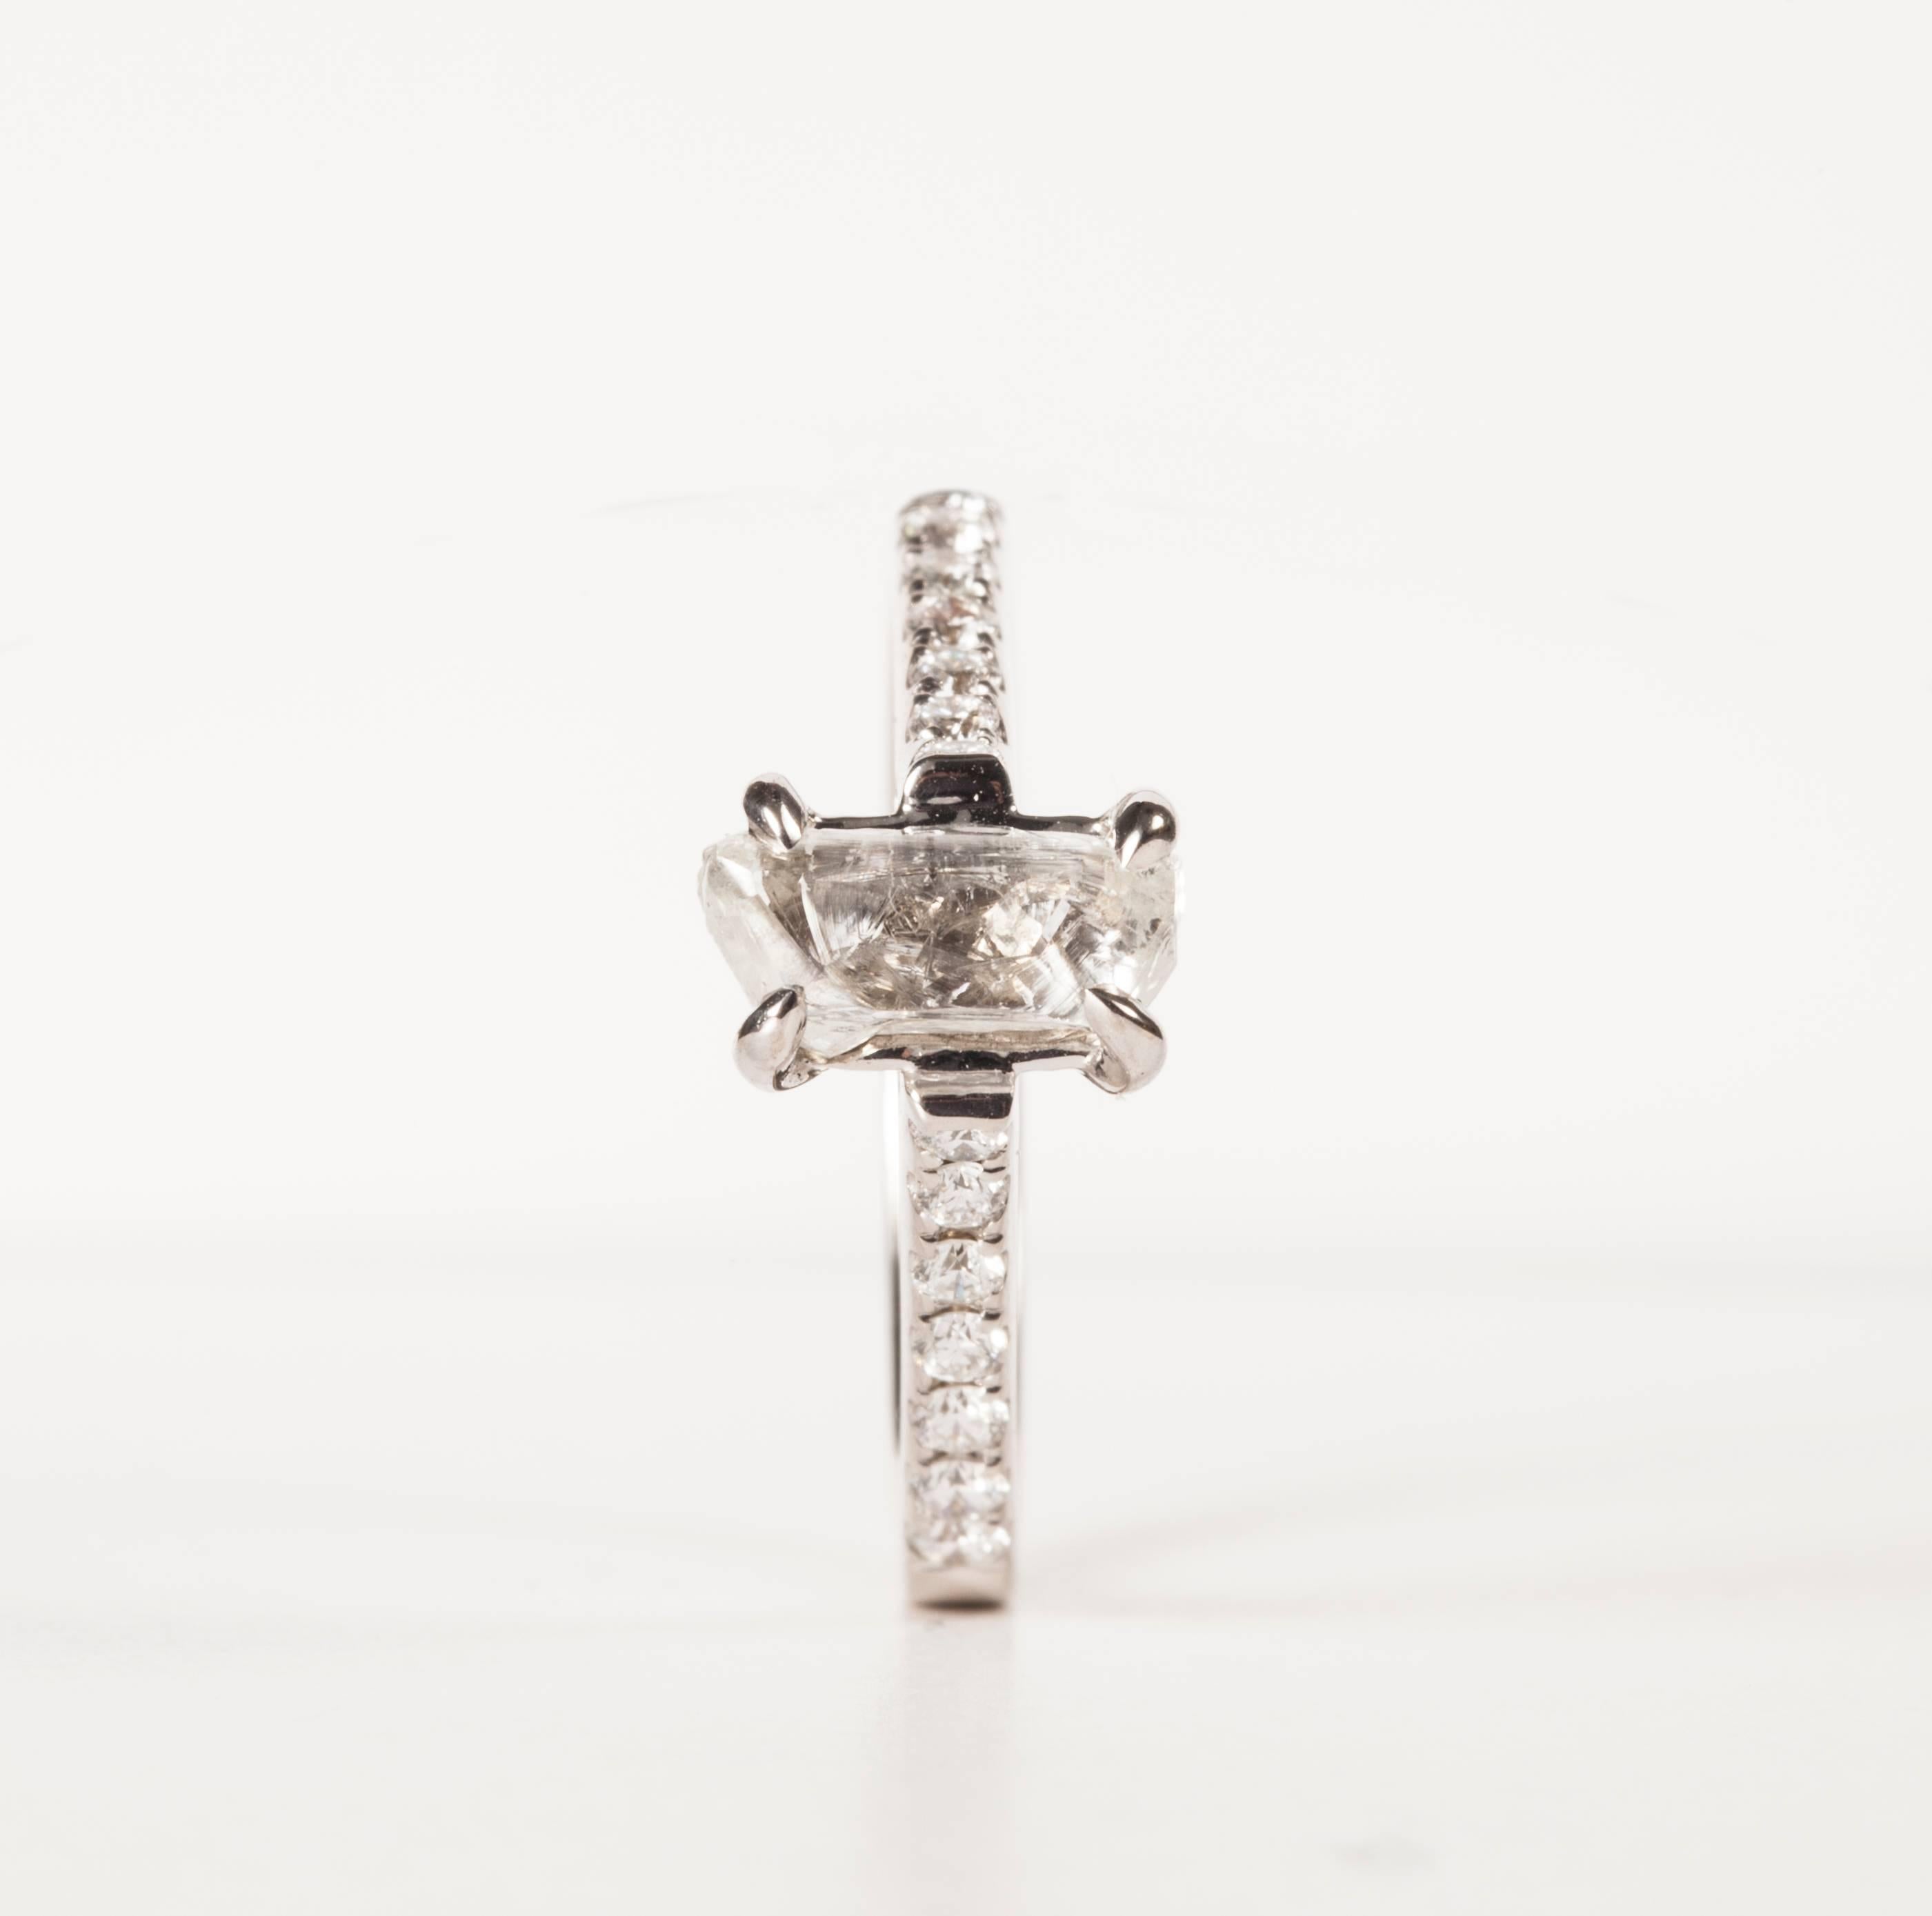 1.28 ct. Natural Whitish Rough diamond & 0.28 ct. TW/VVS Brilliants in 18K handcrafted white gold ring.

Every rough diamond from Roughdiamonds dk has been personally handpicked by Maya Bjørnsten. The diamonds we reject are sent back to be cut into